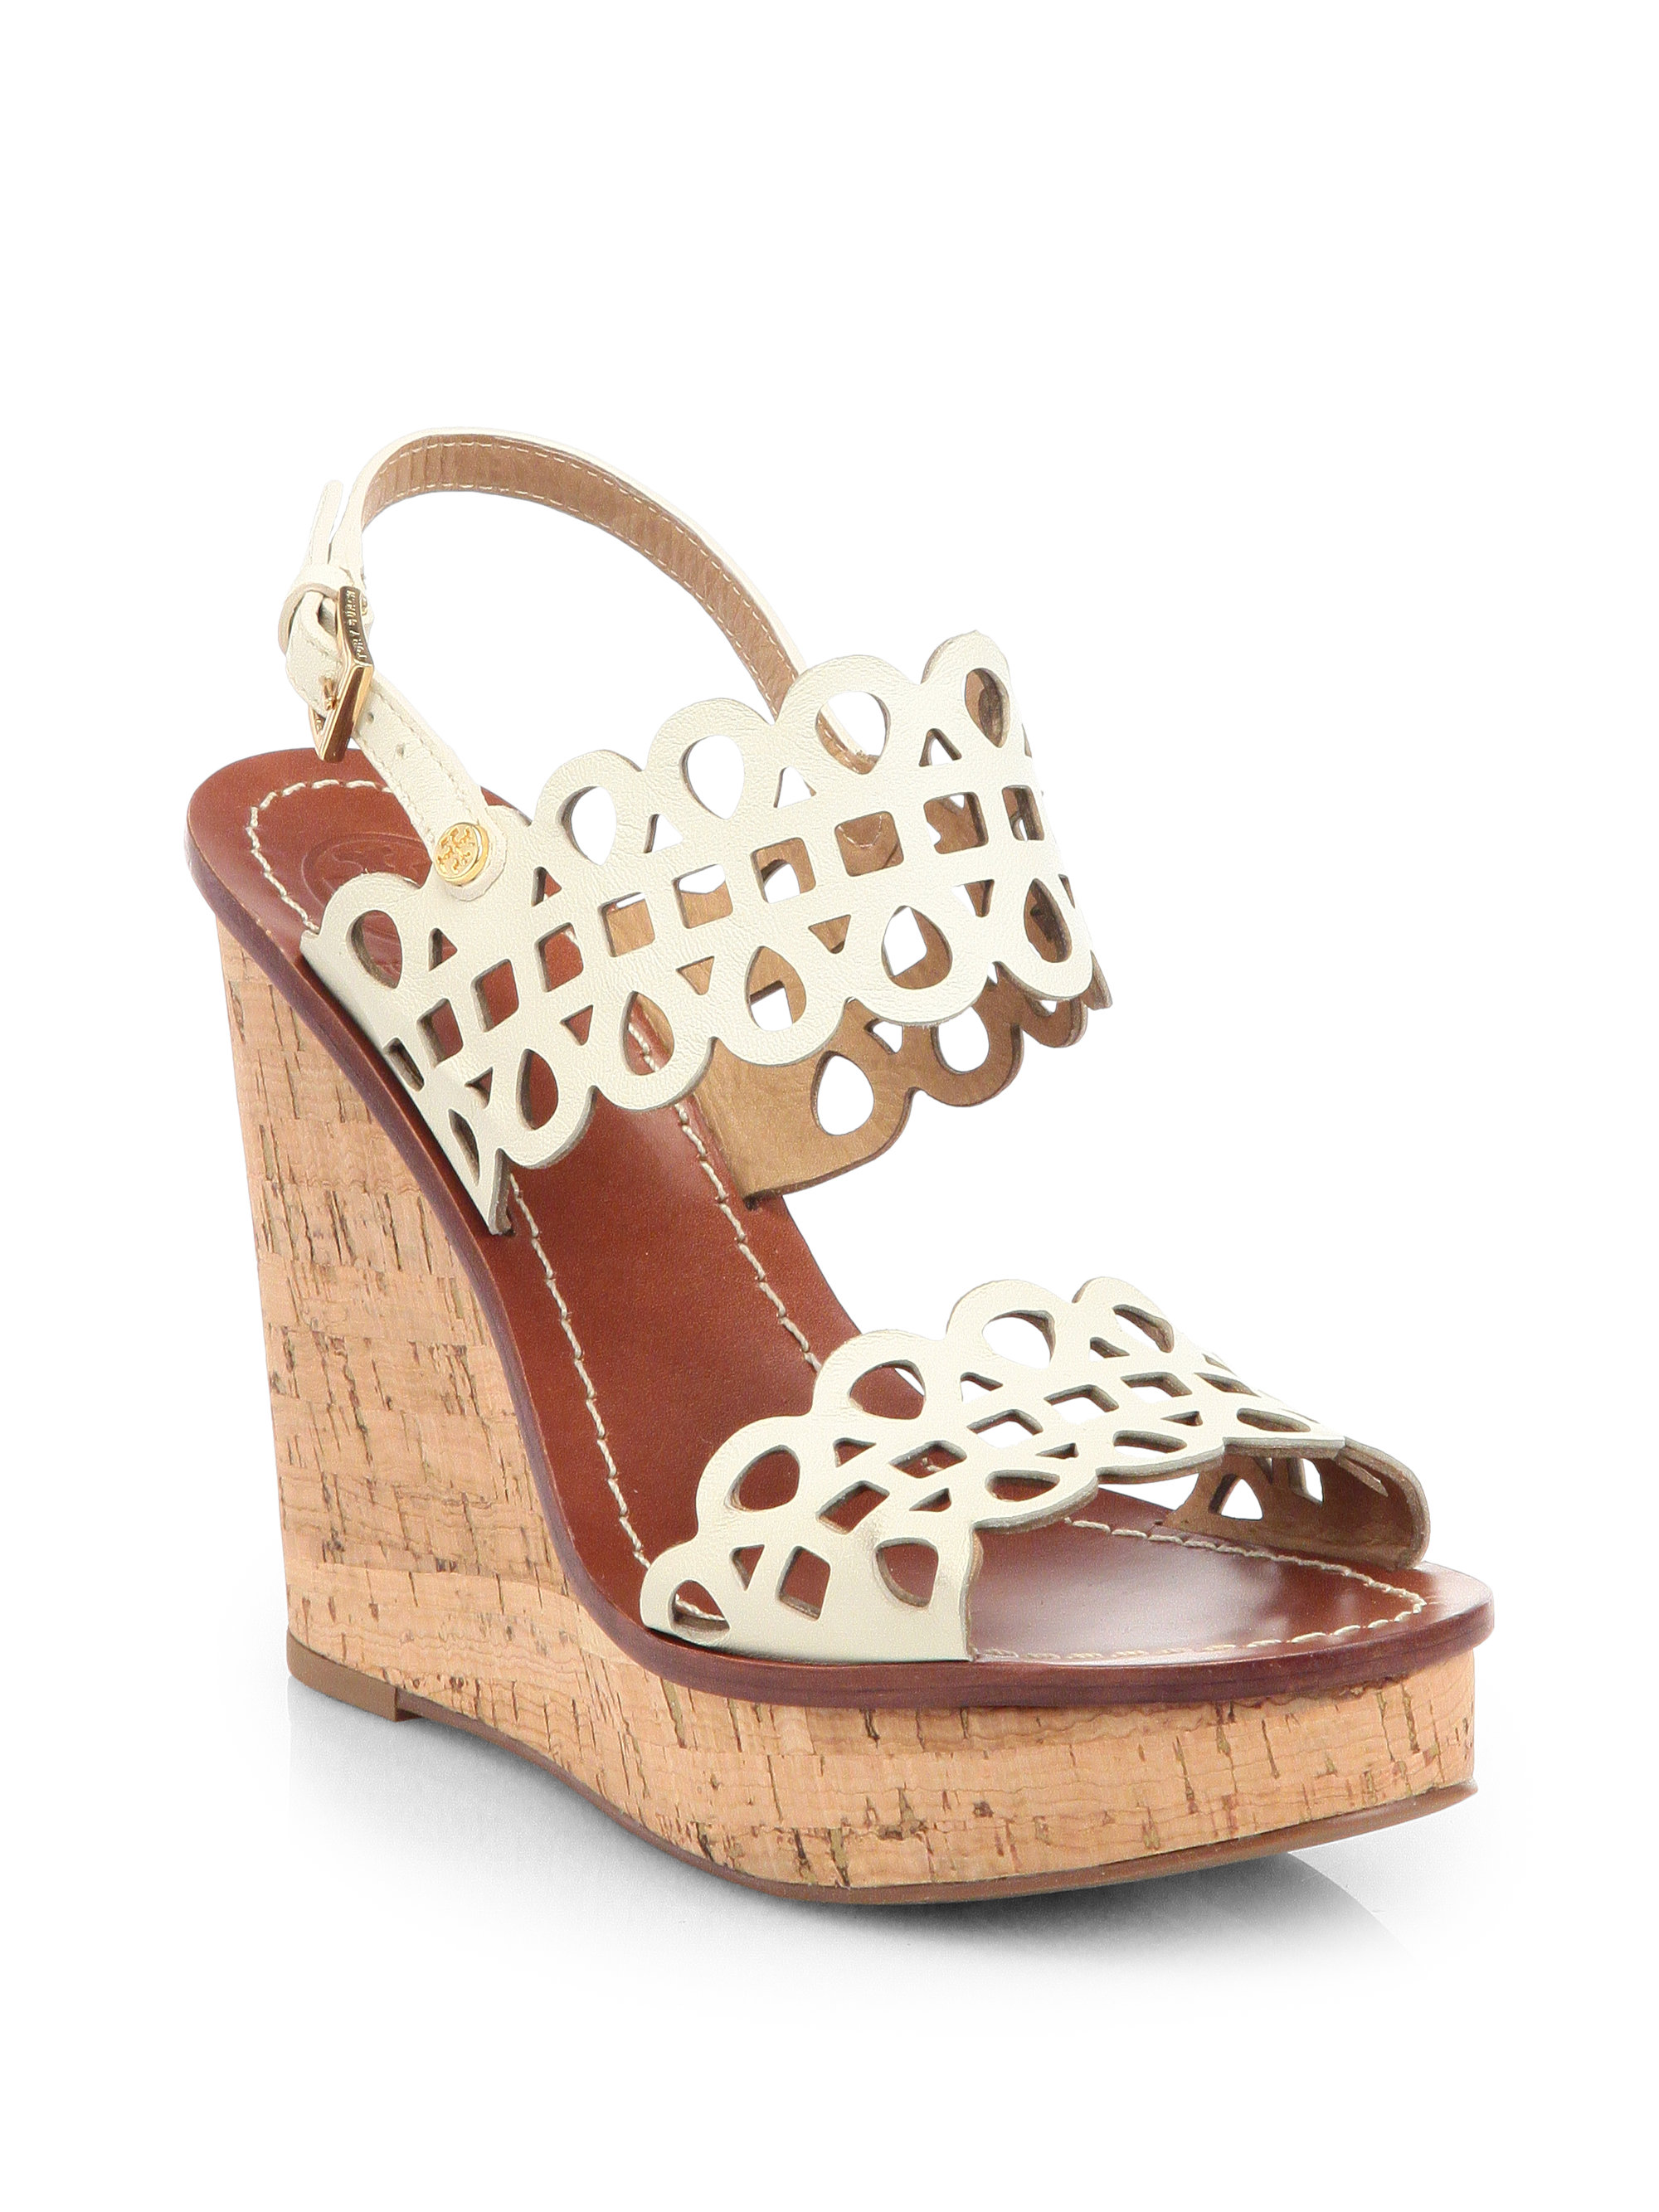 Tory Burch Nori Leather Cork Wedge Sandals in Gold (IVORY) | Lyst